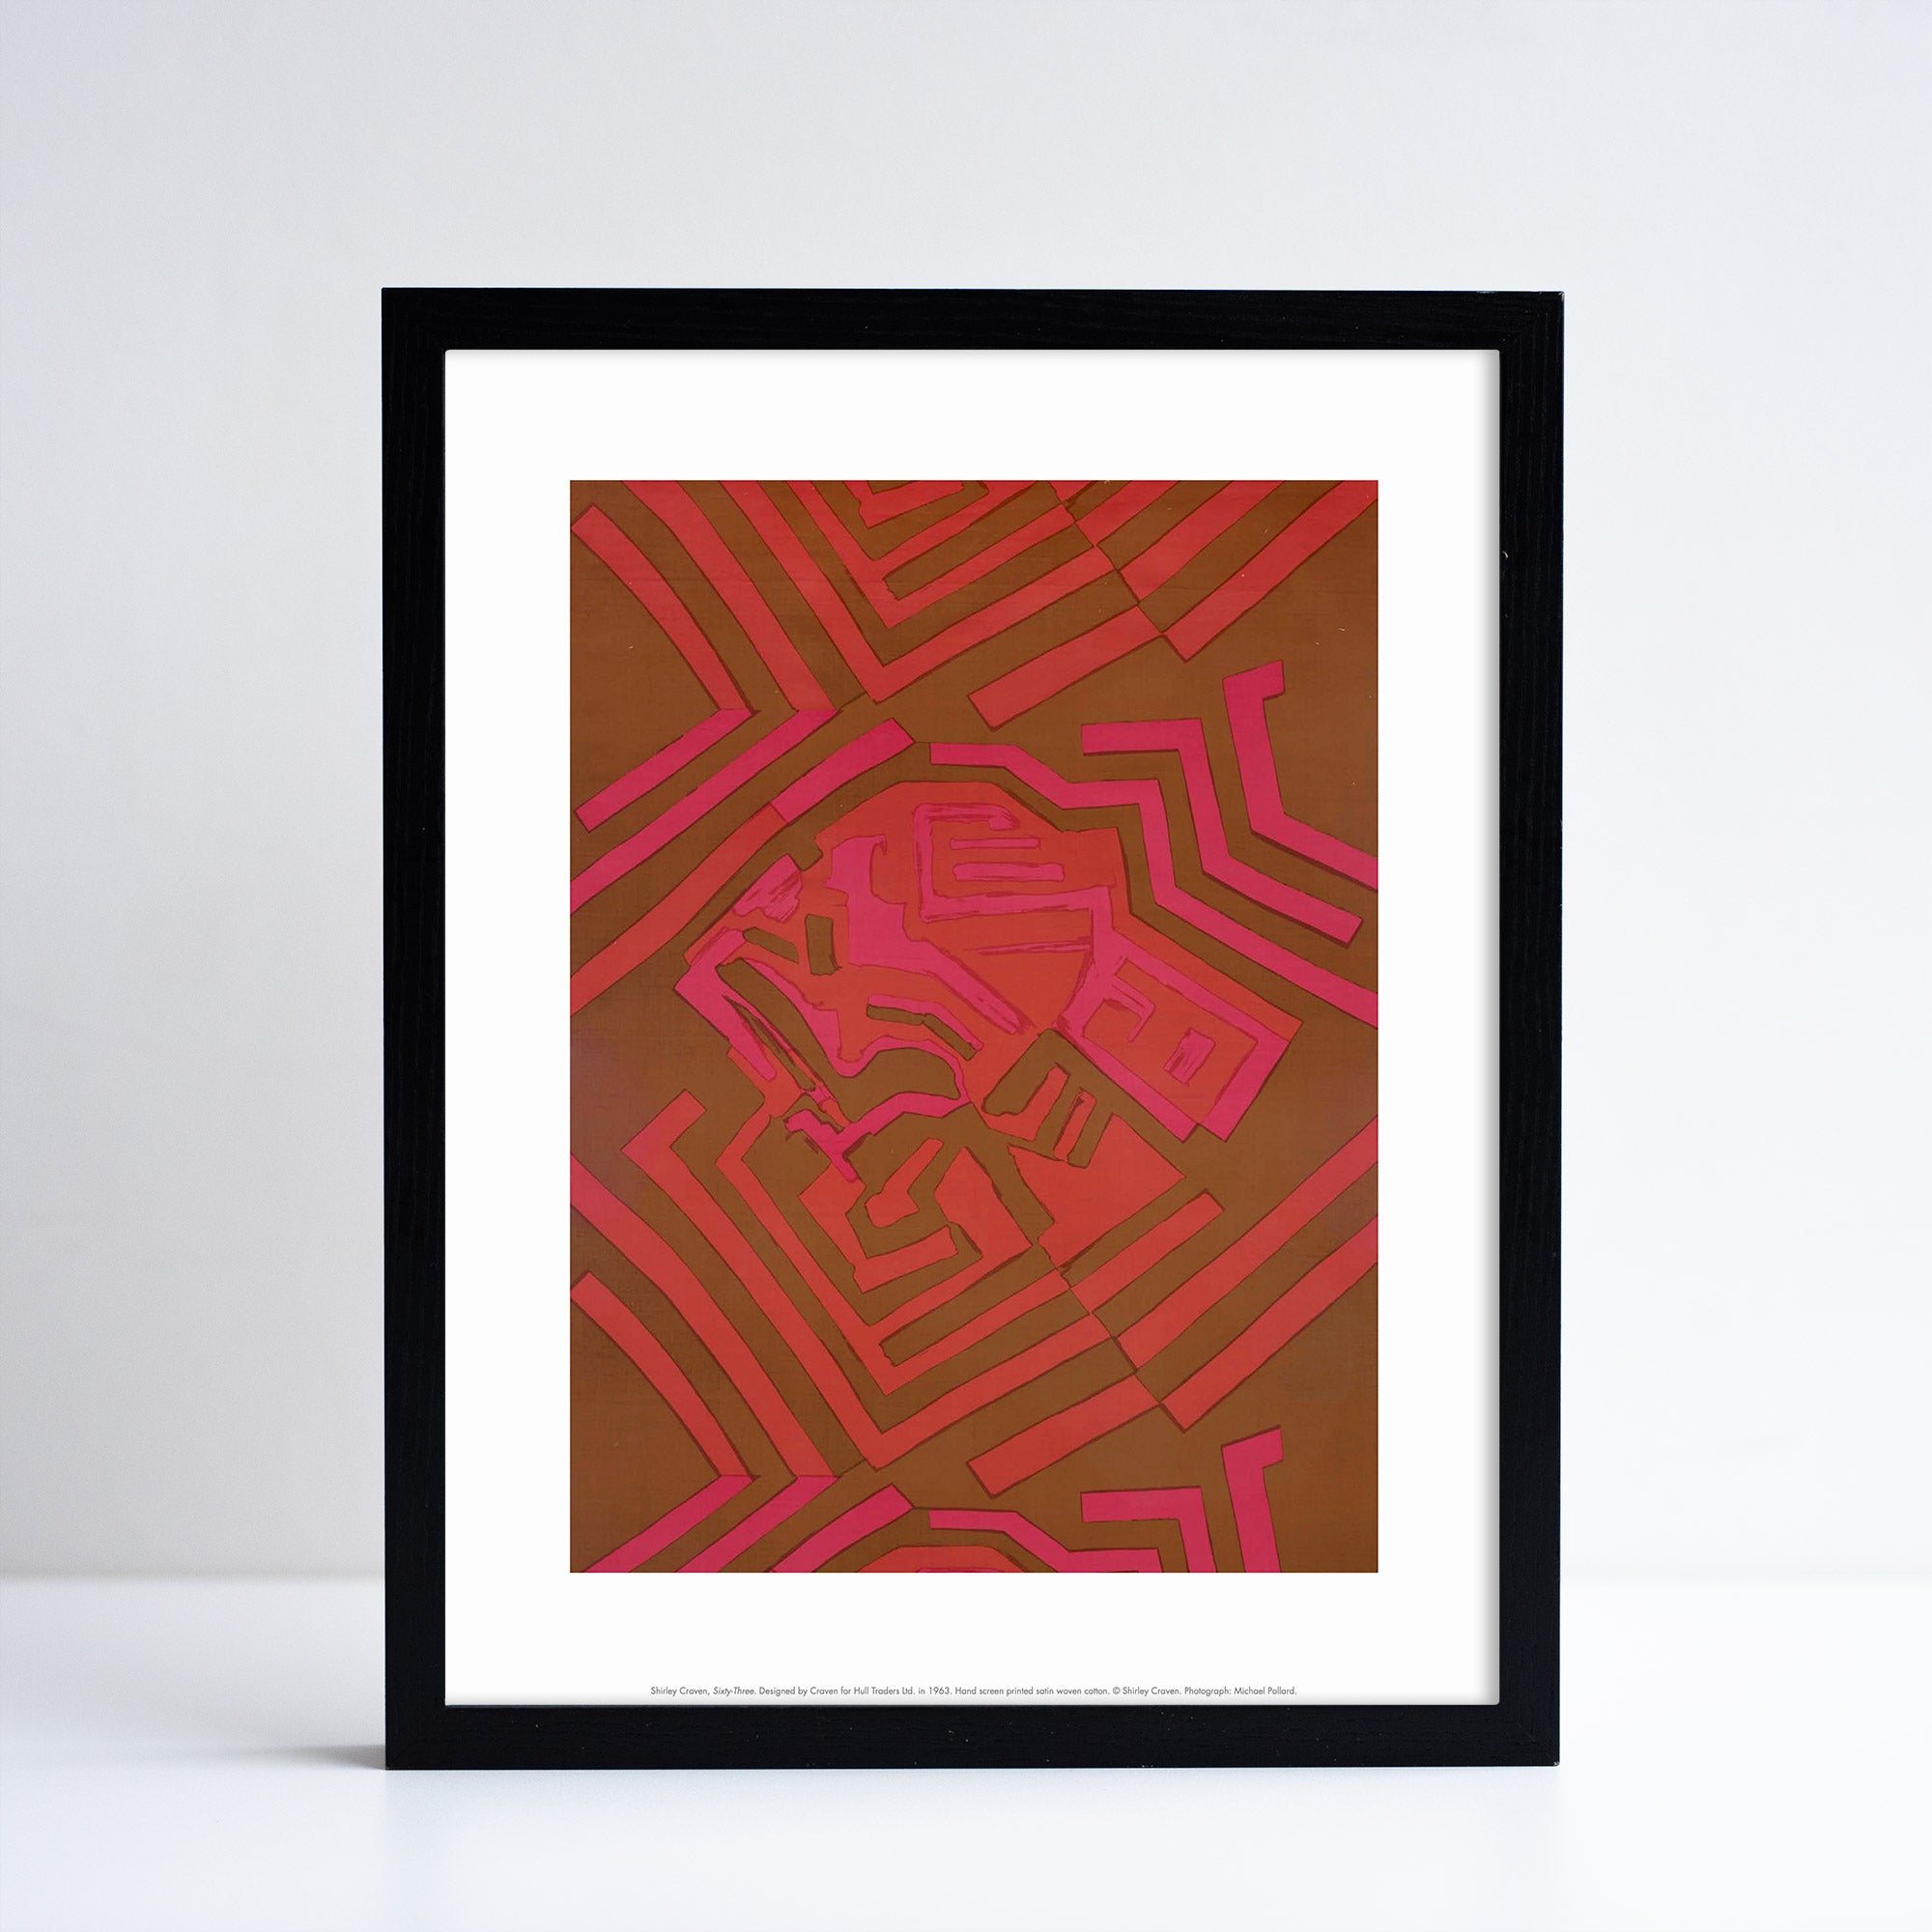 Reproduction of a red and pink geometric textiles piece by Shirley Craven, in print format with a white border. Placed in a black frame.